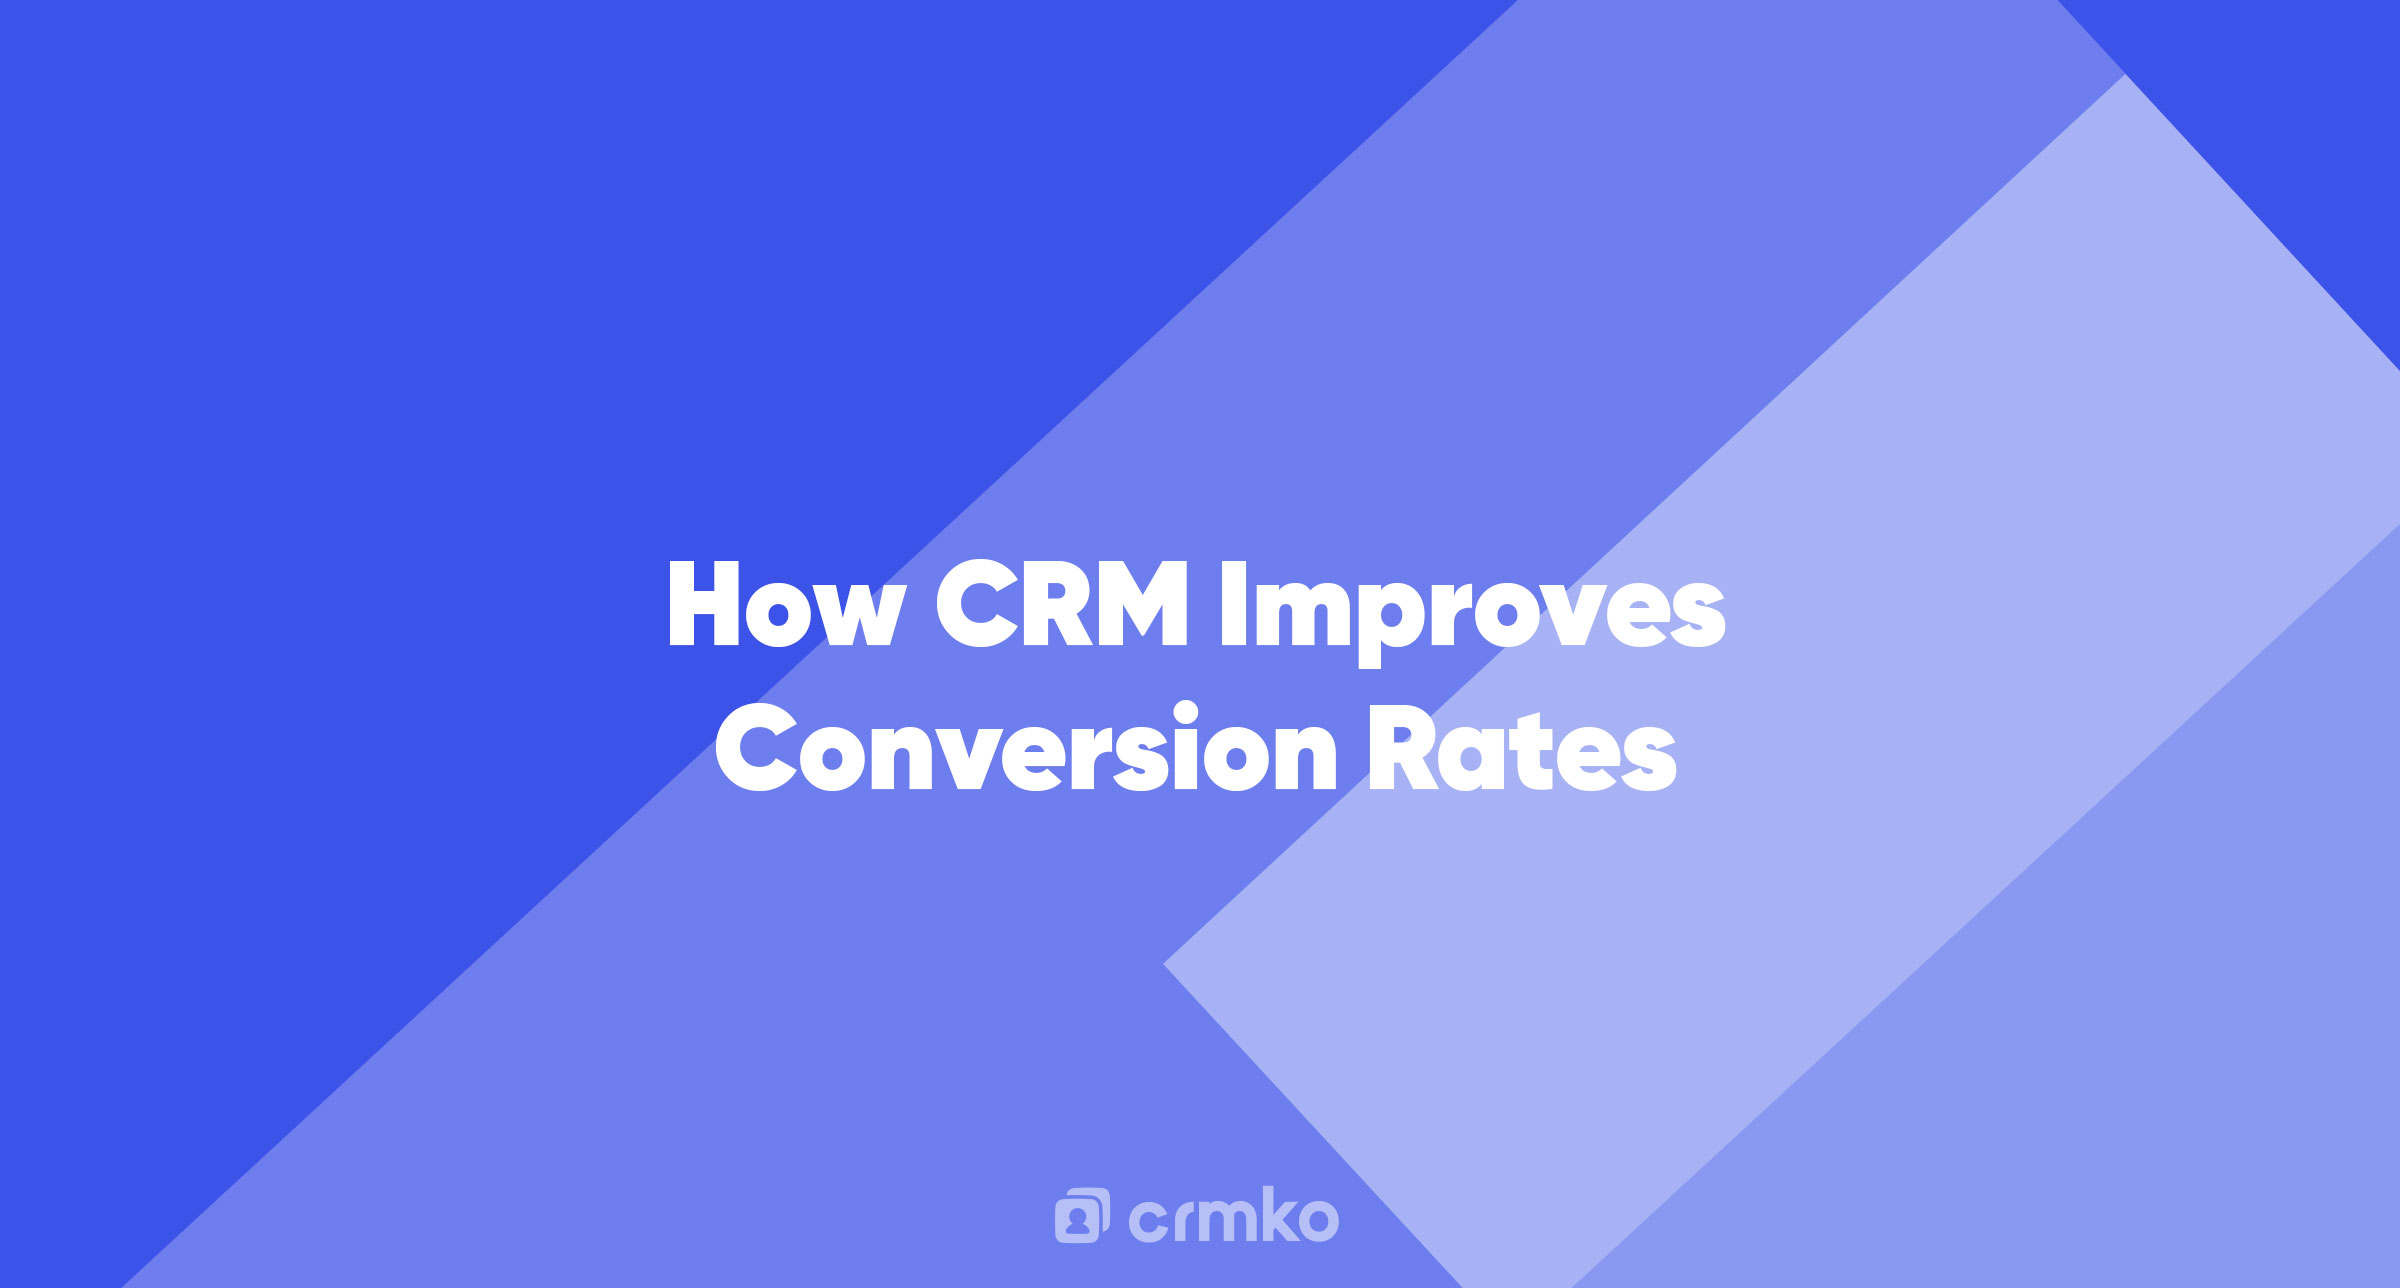 Article | How CRM Improves Conversion Rates